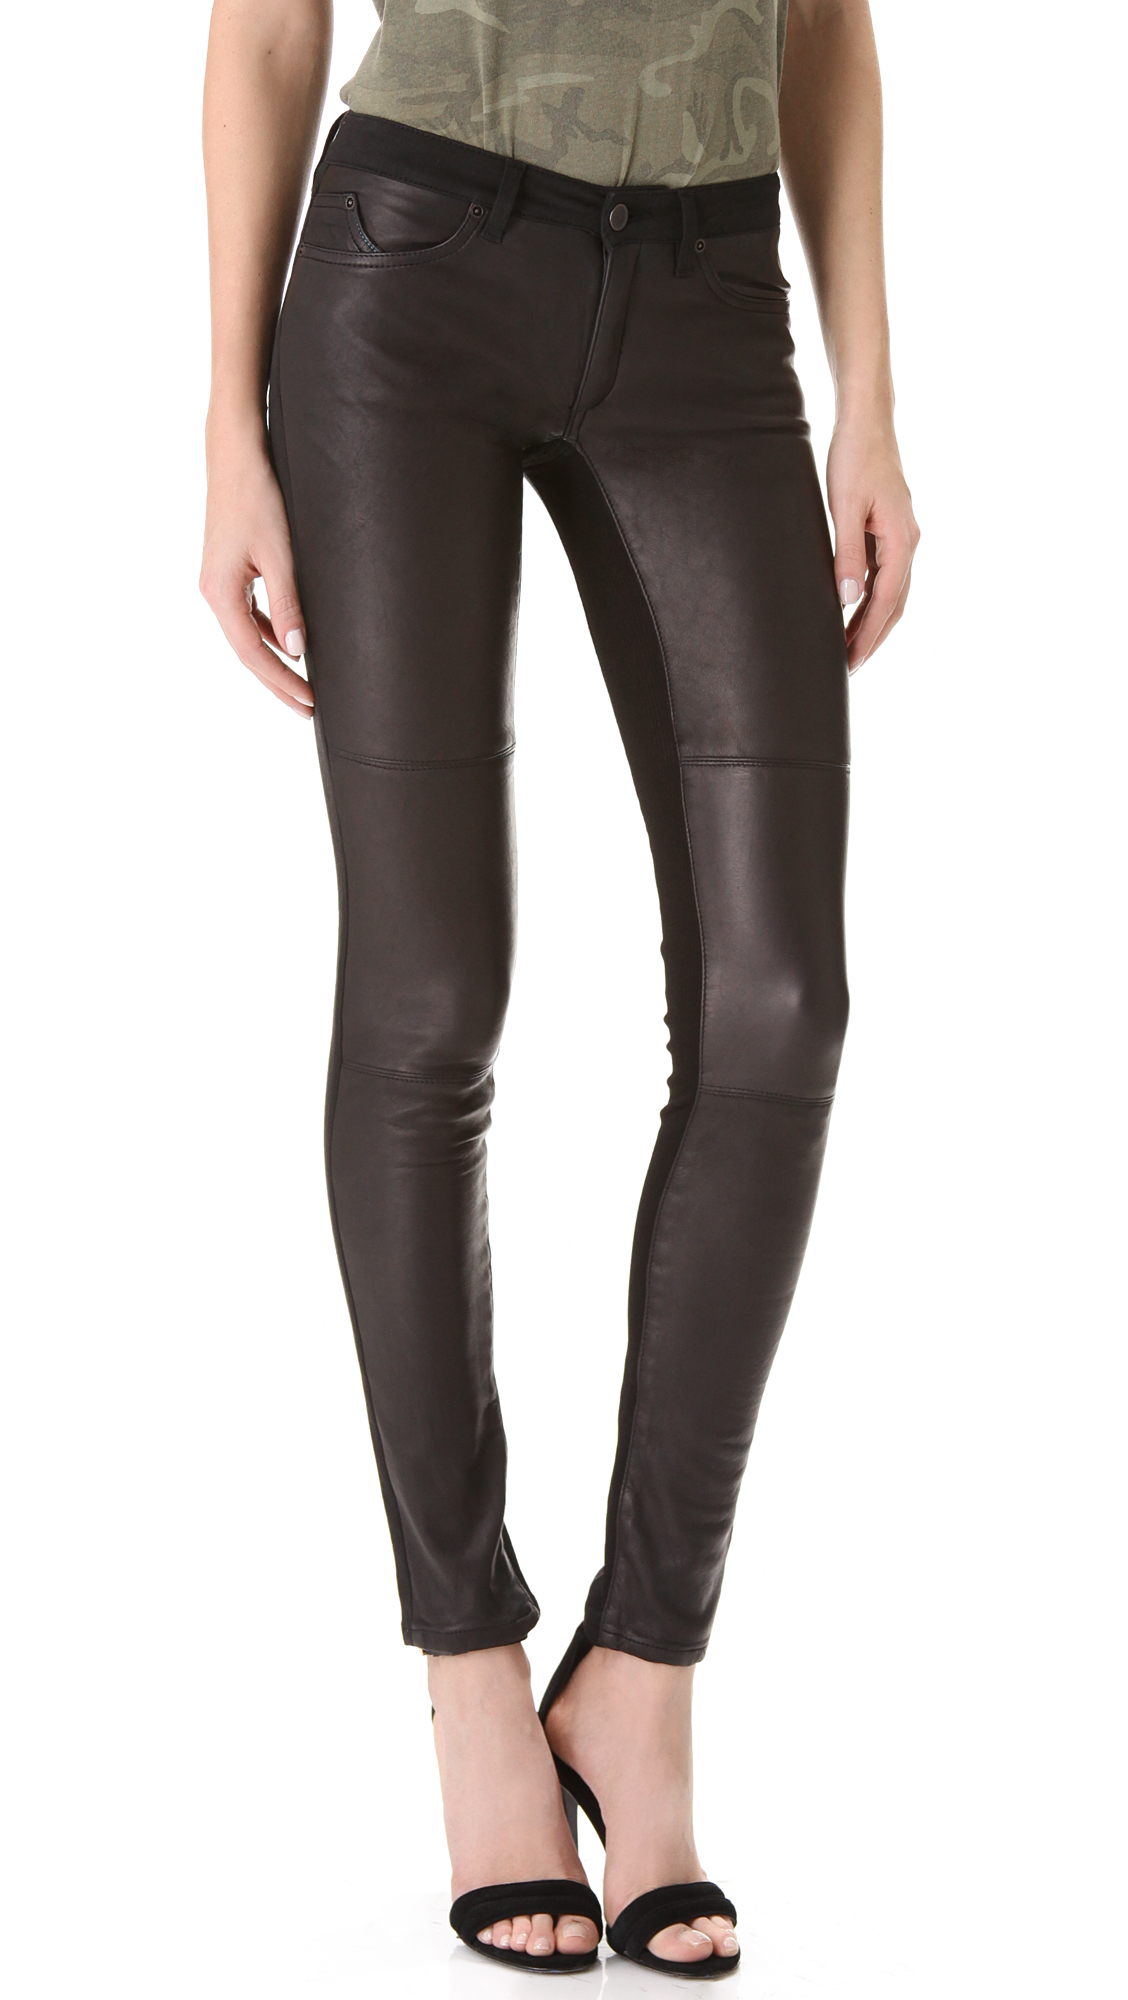 Lyst - Superfine Leather Panel Skinny Jeans in Black